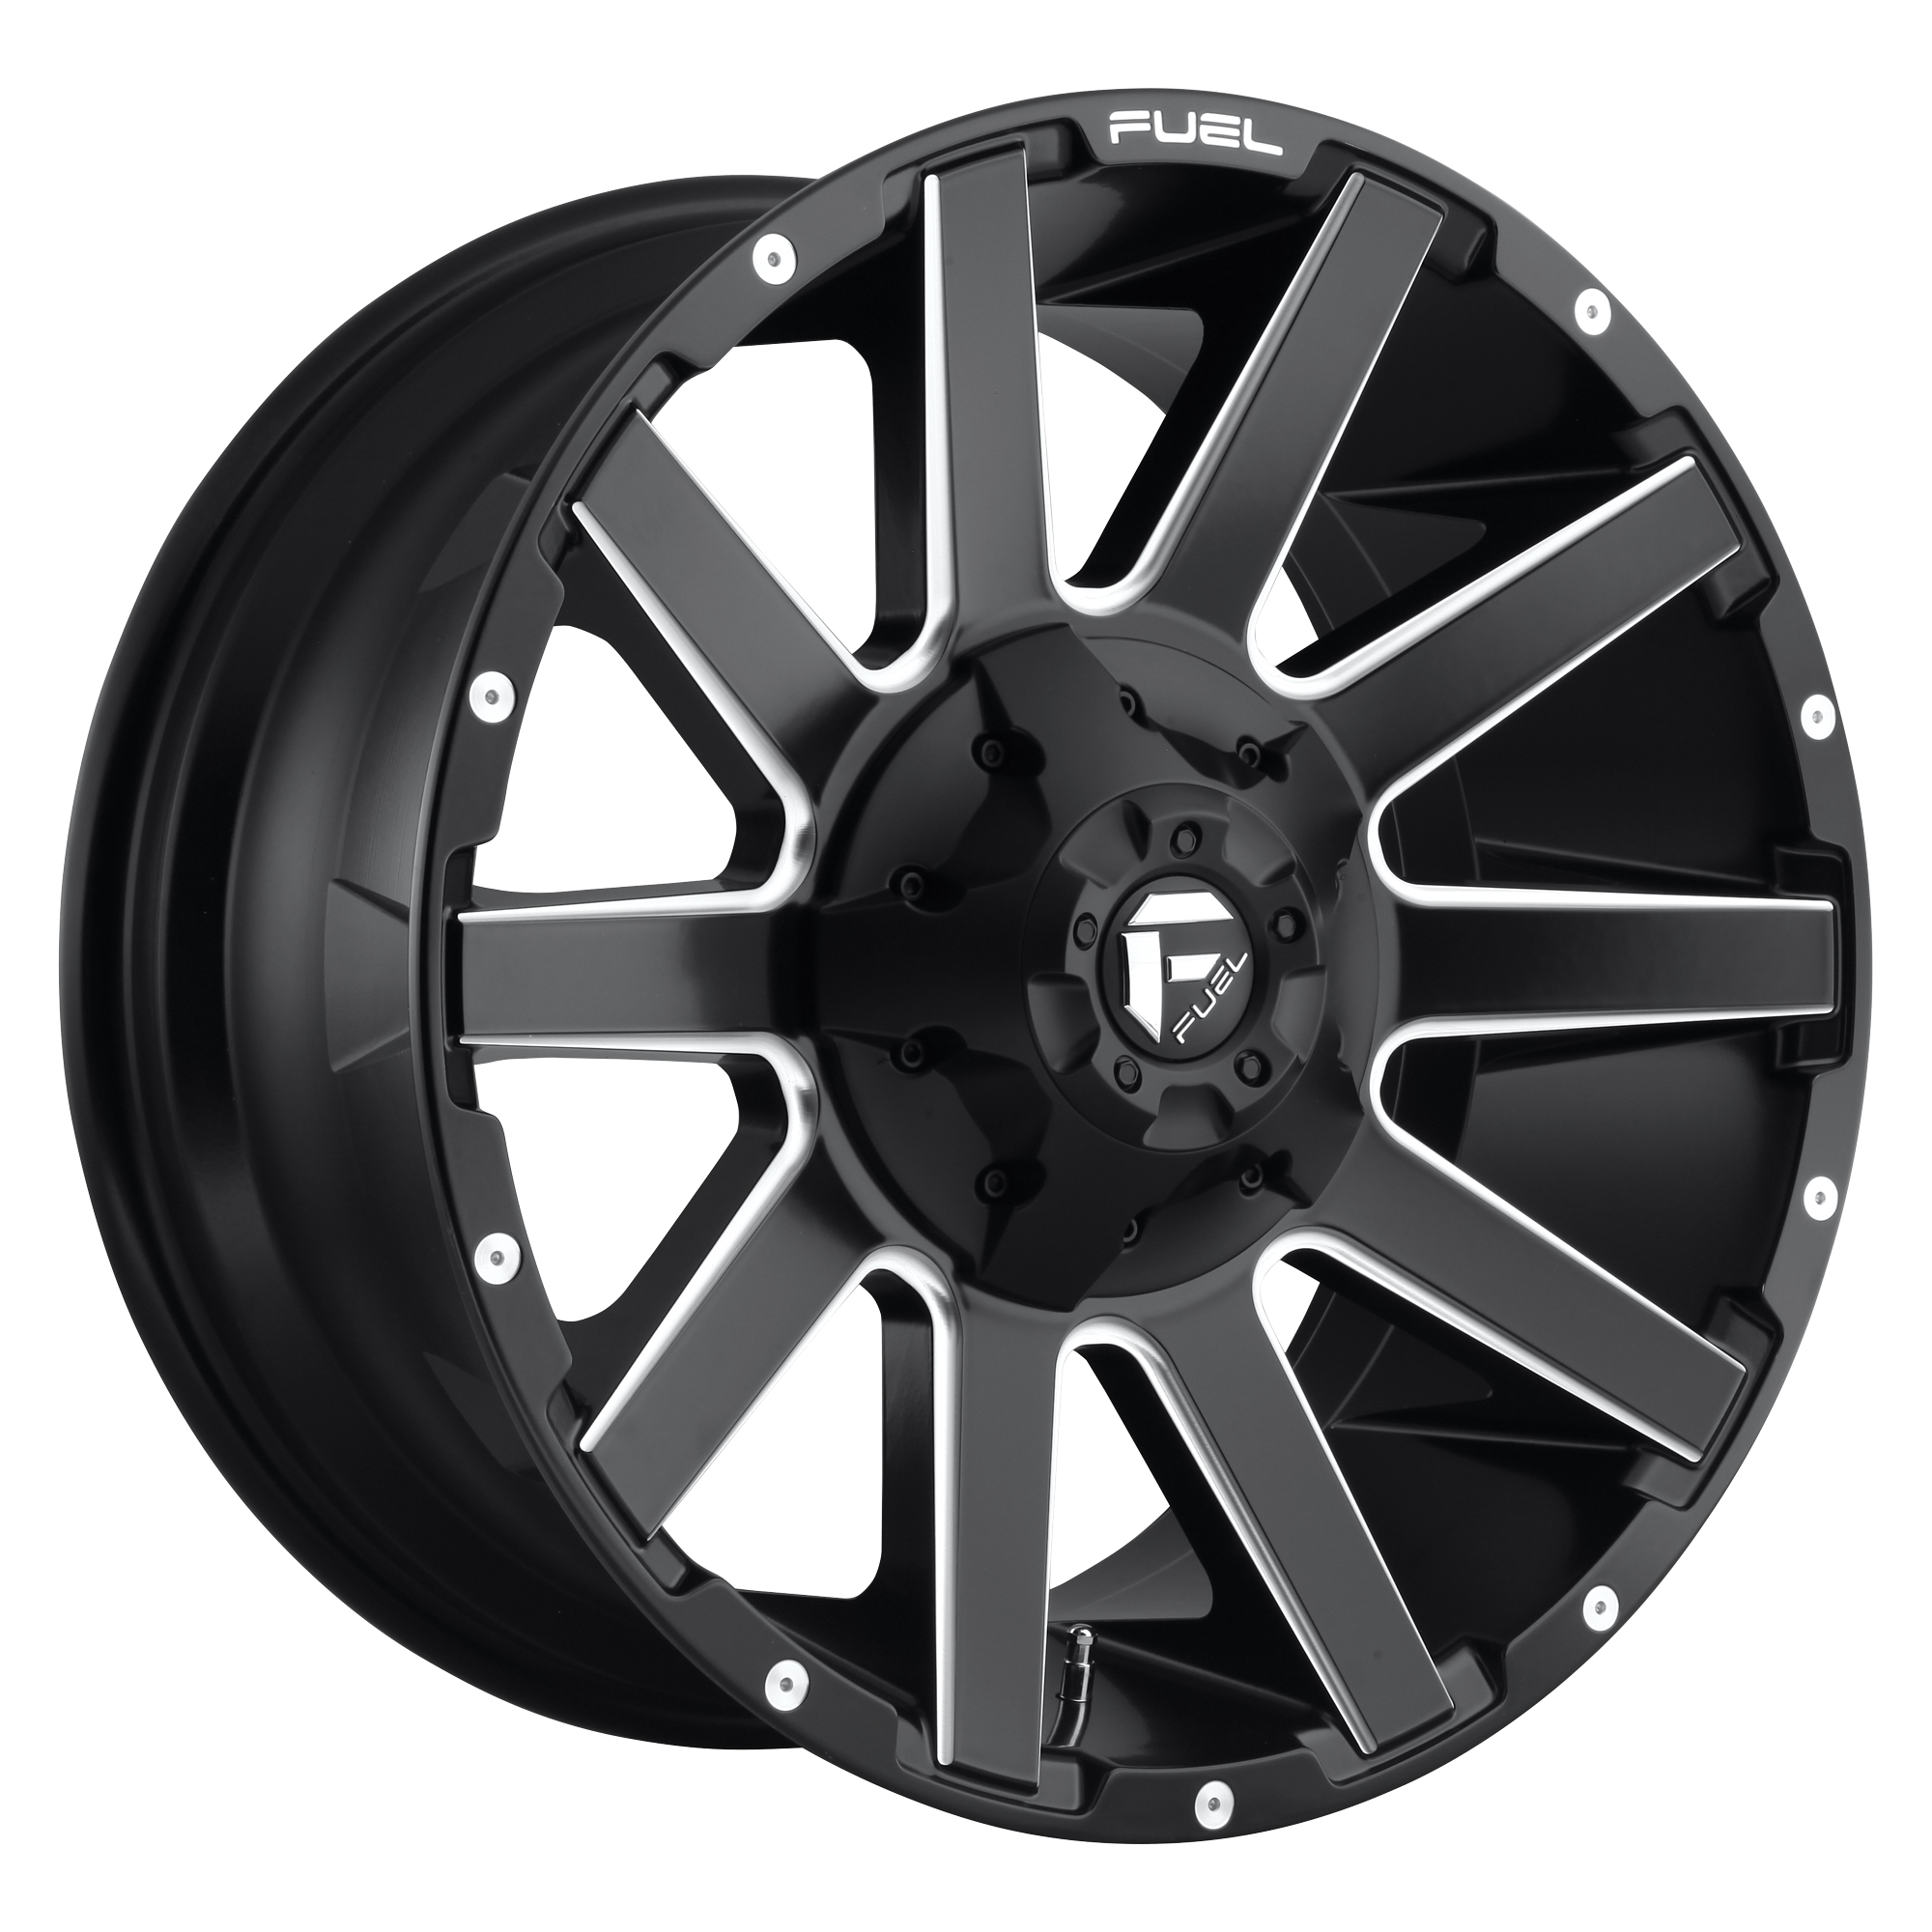 CONTRA 20x9 8x170.00 MATTE BLACK MILLED (20 mm) - Tires and Engine Performance